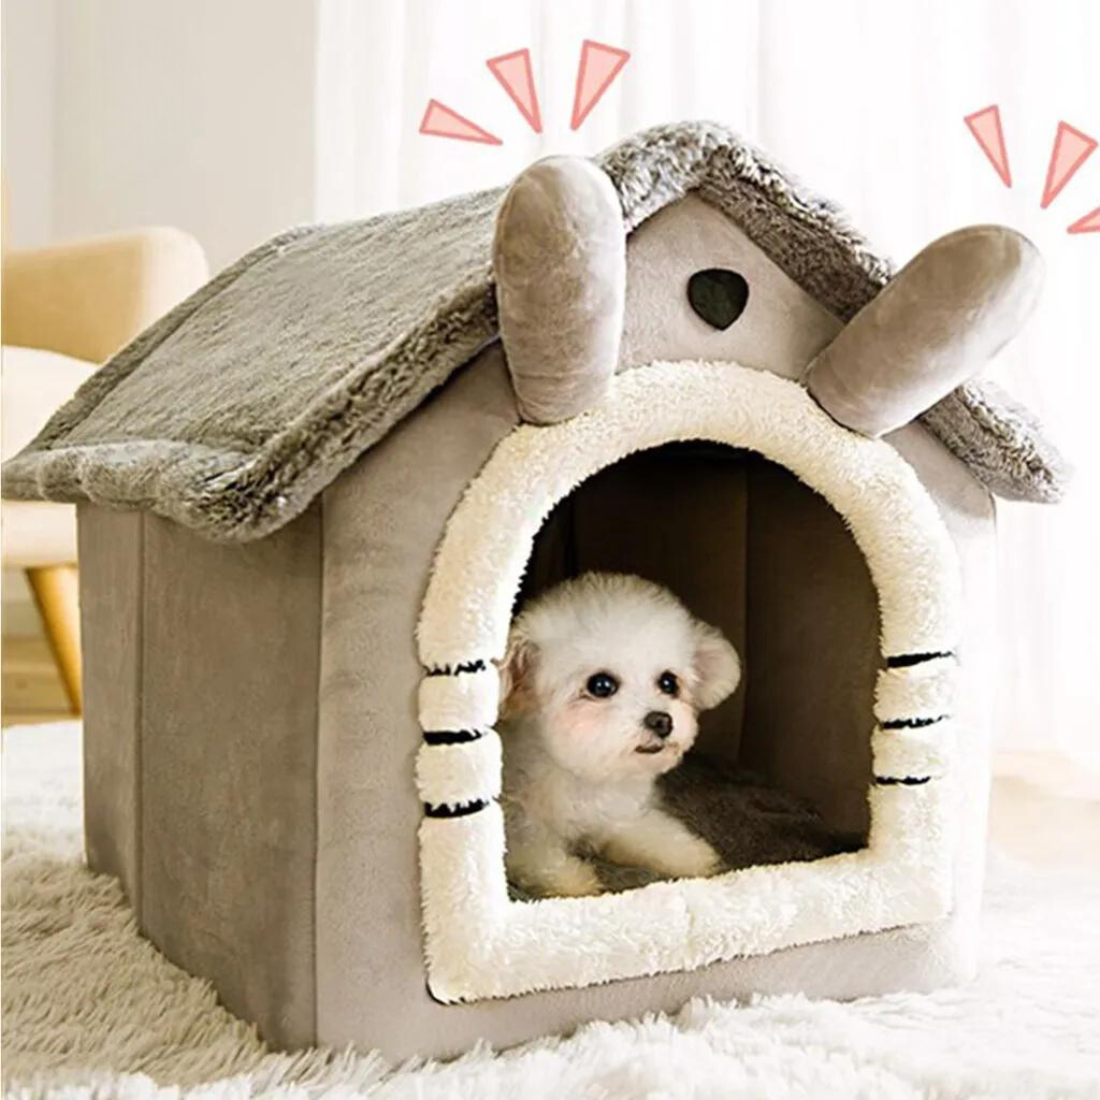 Foldable Pet House Bed